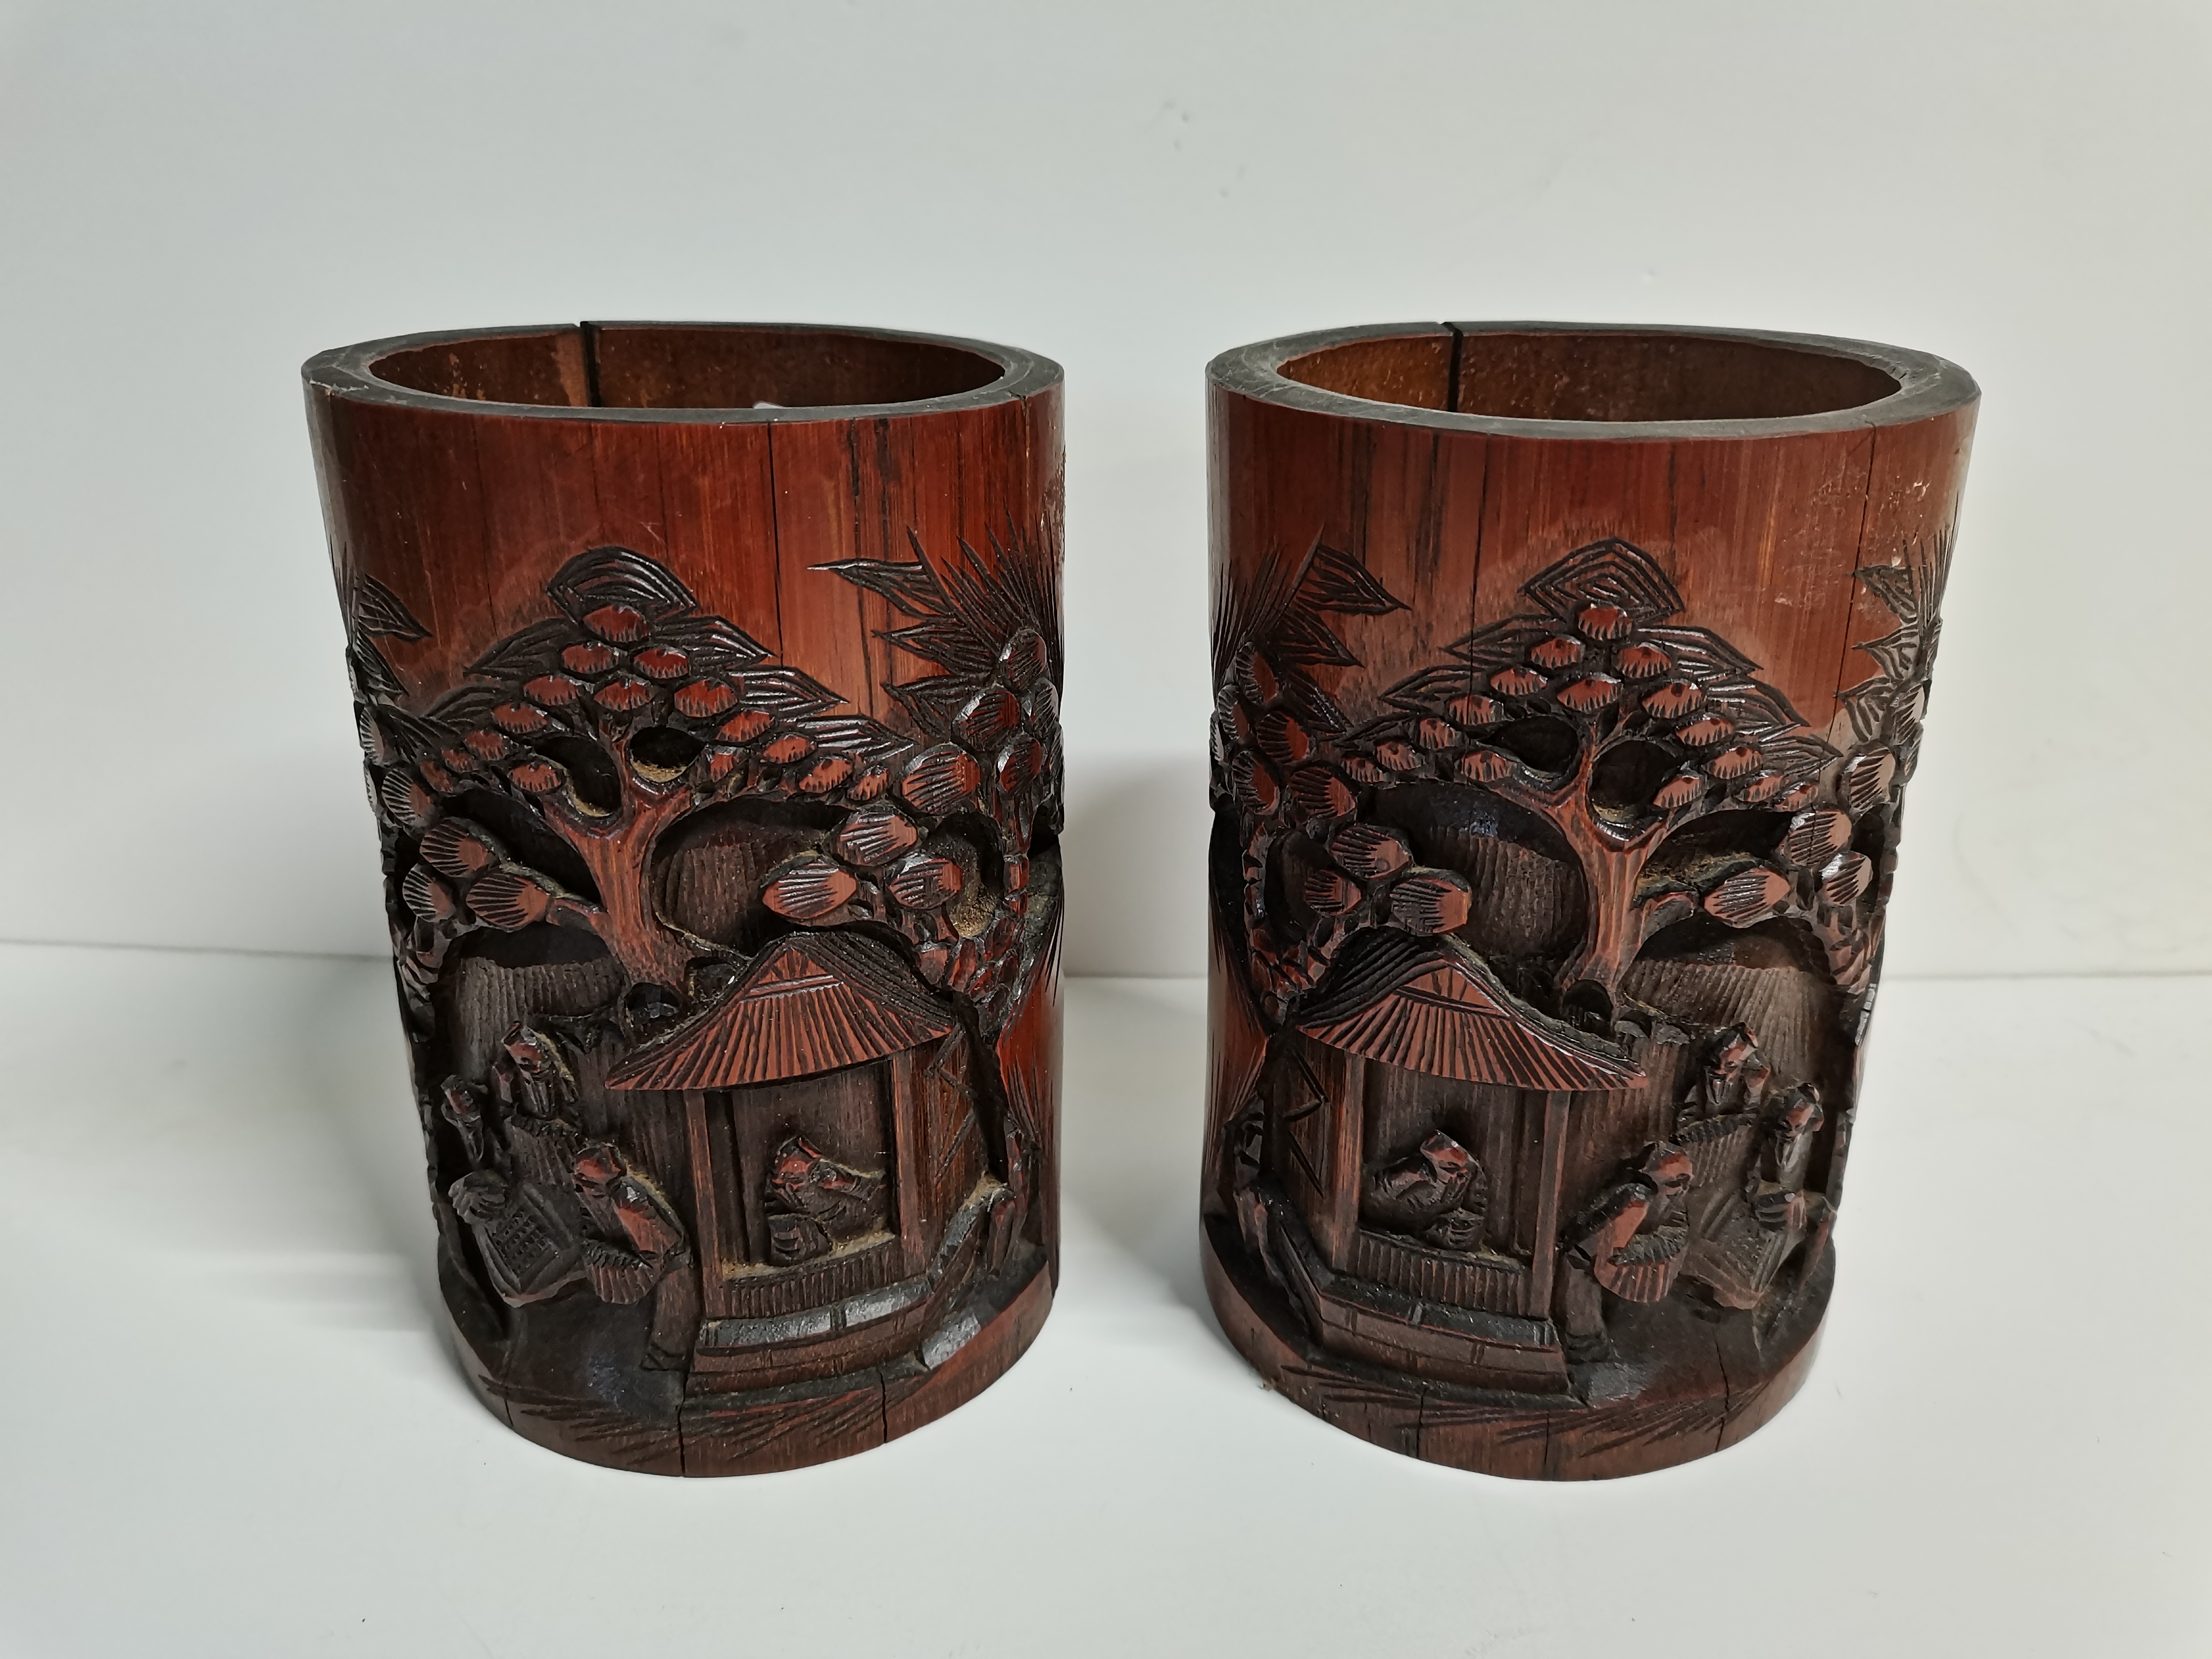 Pr. Early brush pots - Chinese